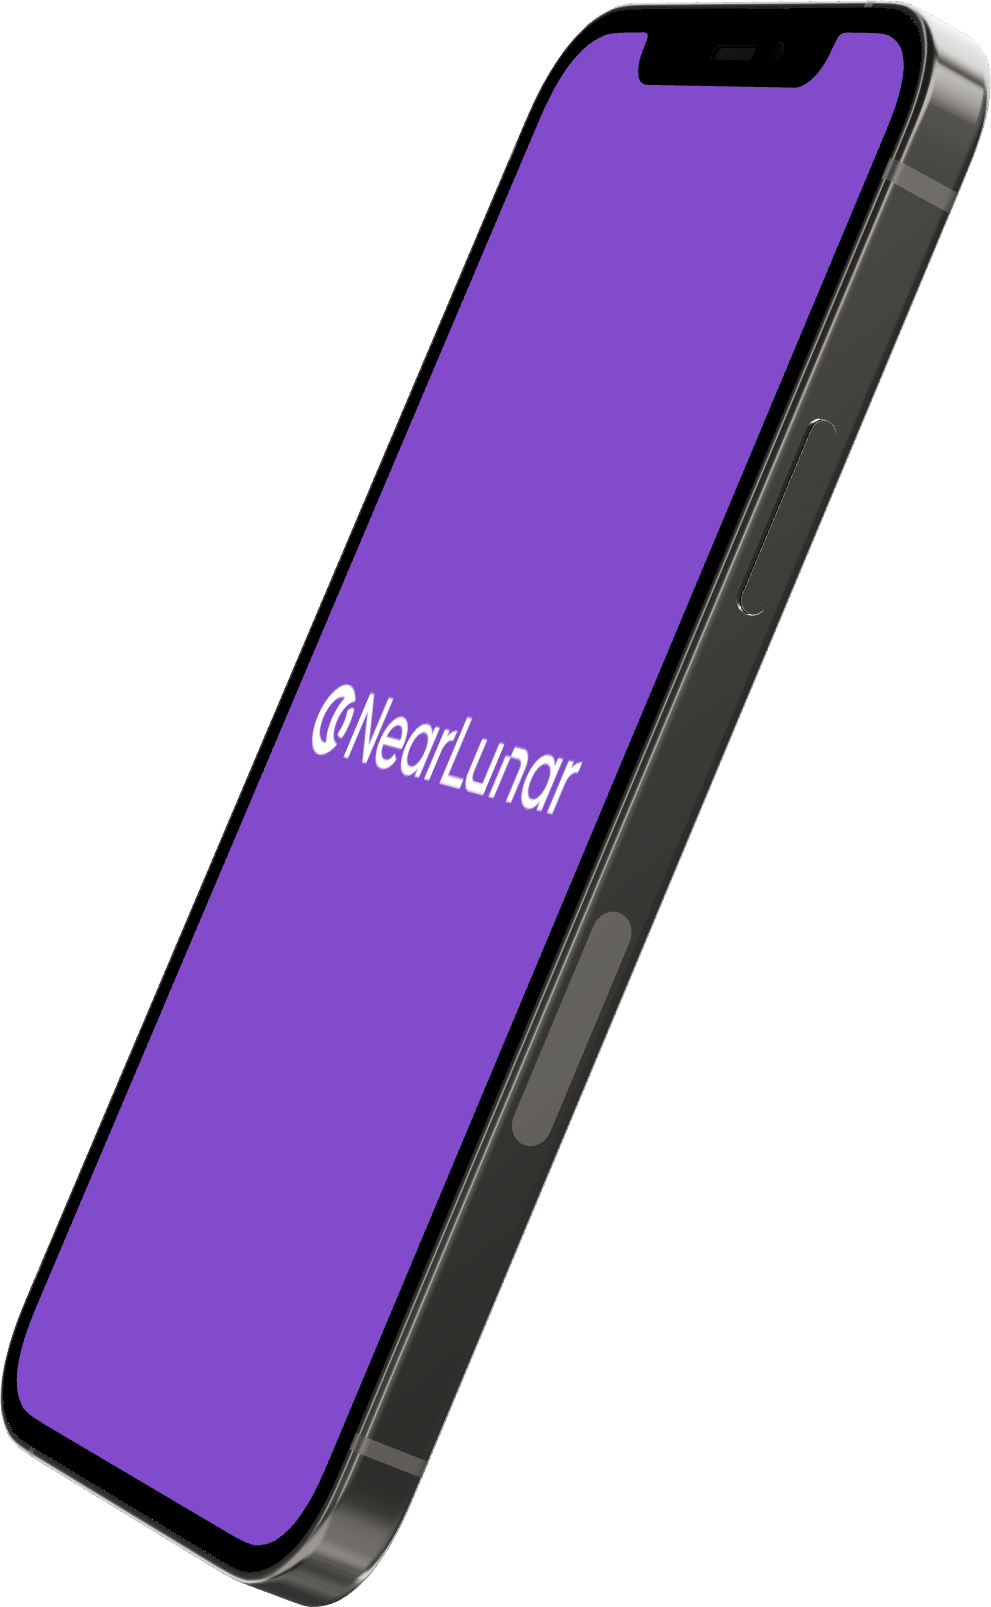 A Mobile Phone with the NearLunar Logo on the Screen